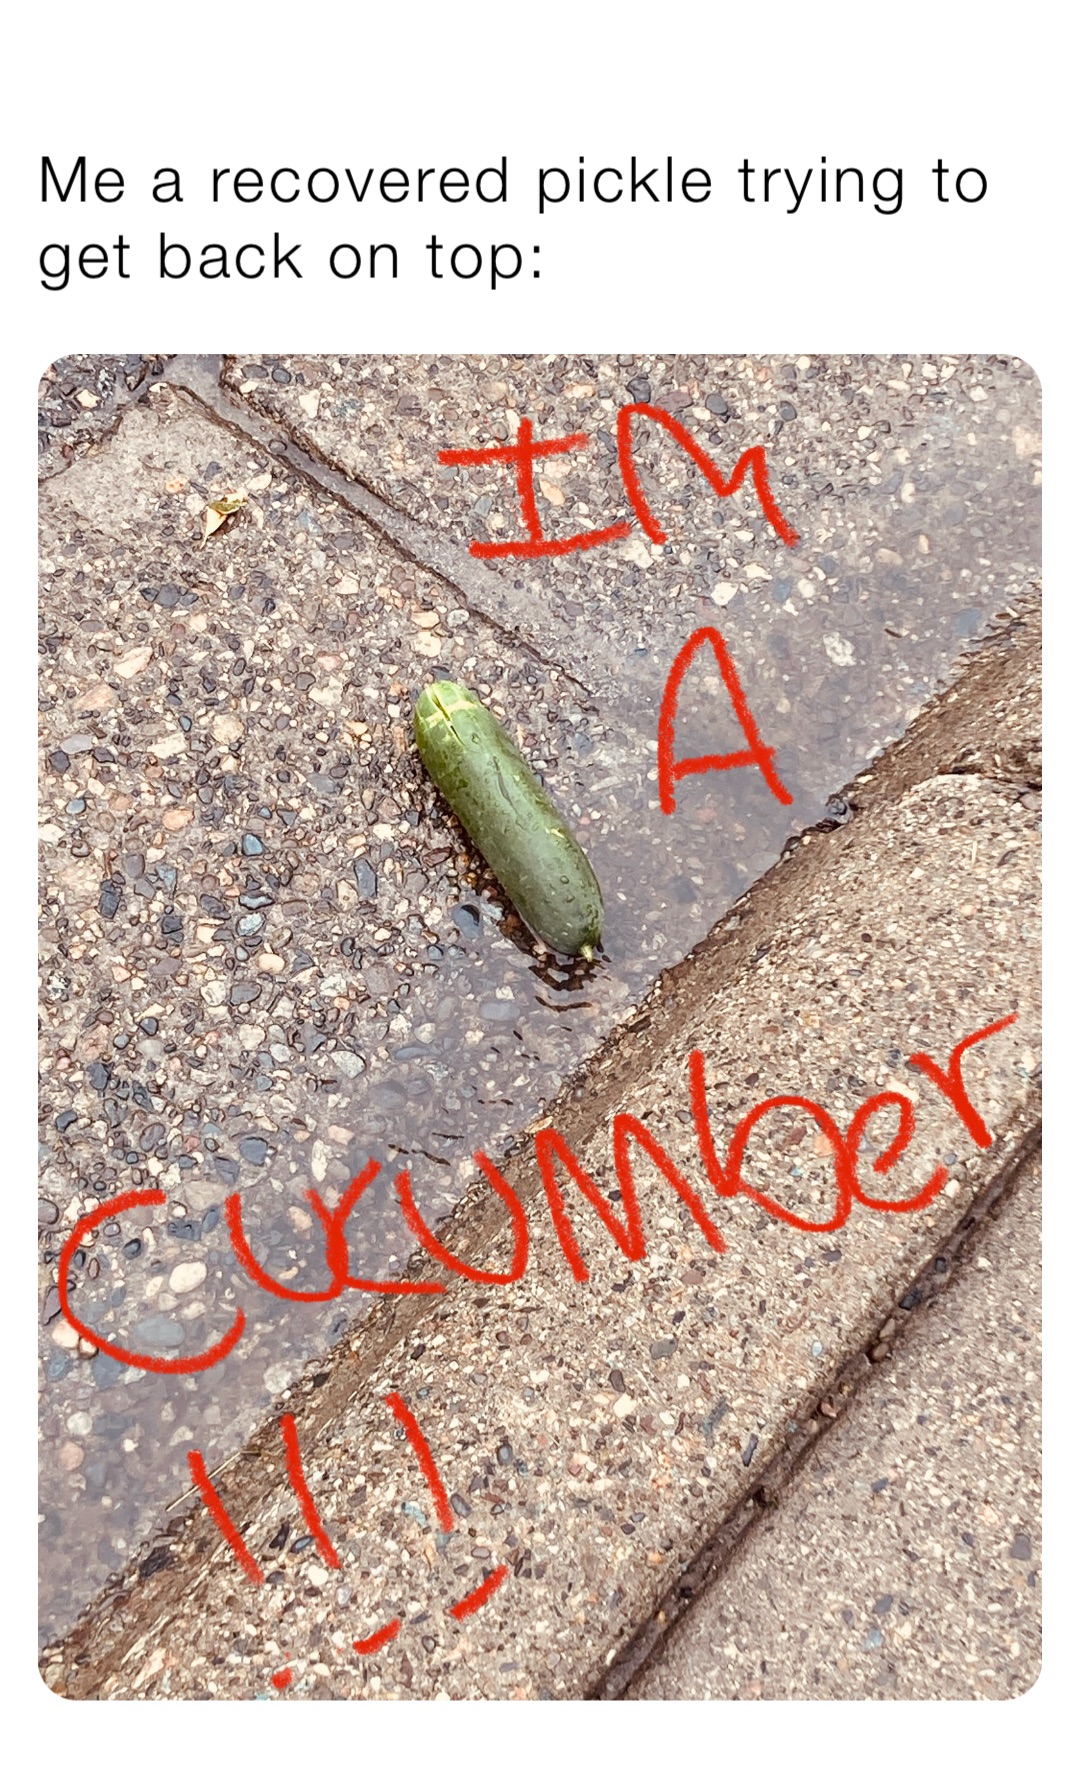 Me a recovered pickle trying to get back on top: